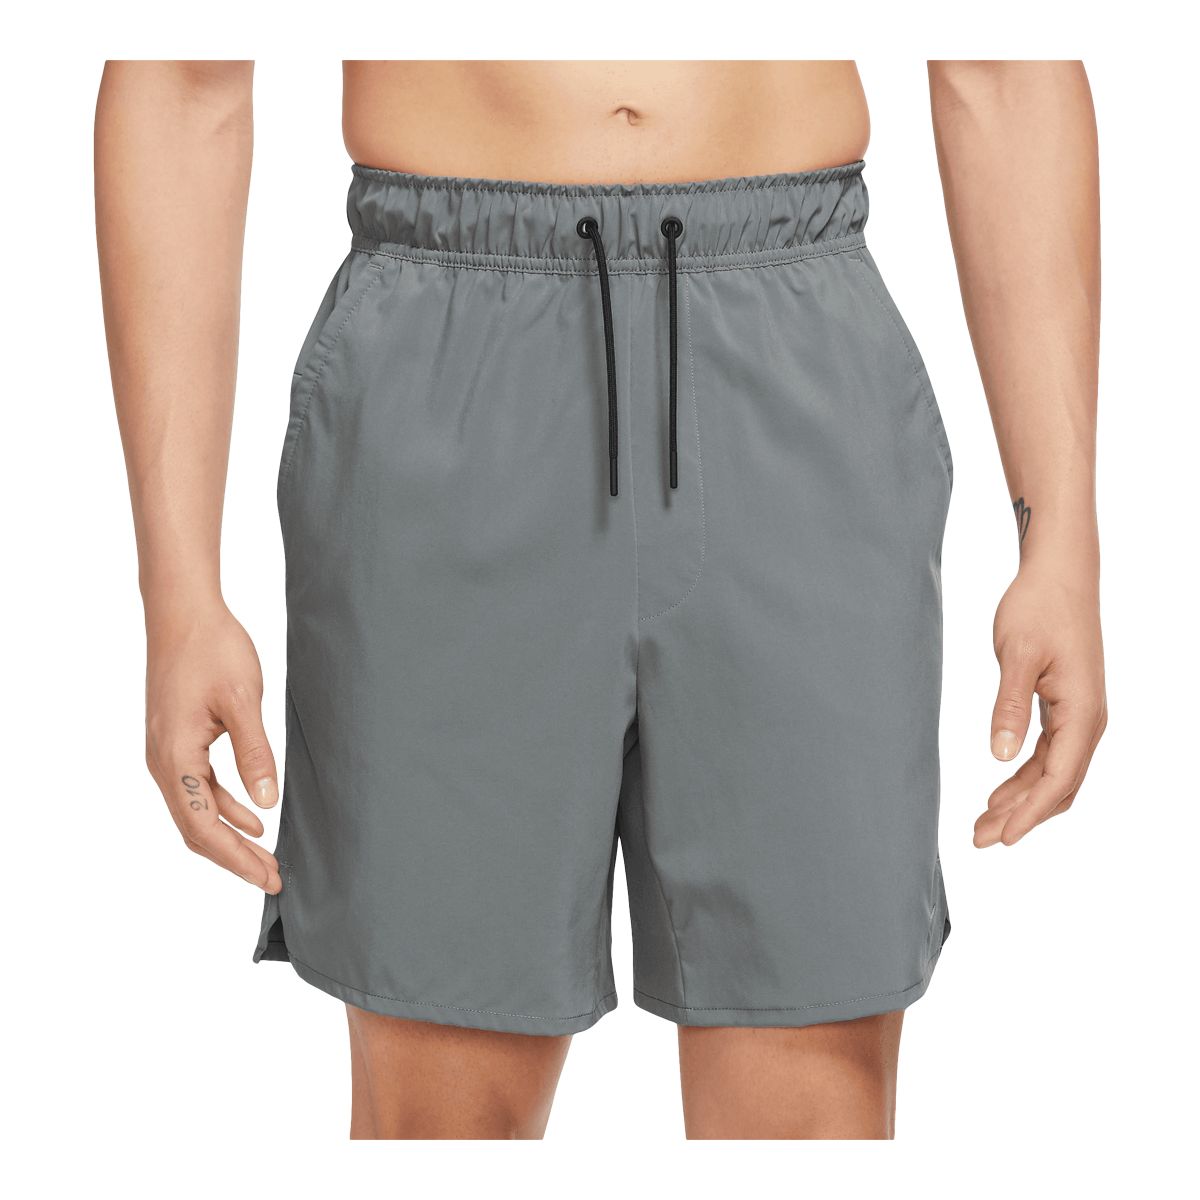 Image of Nike Men's Dri-FIT Unlimited Woven 7 Inch Shorts